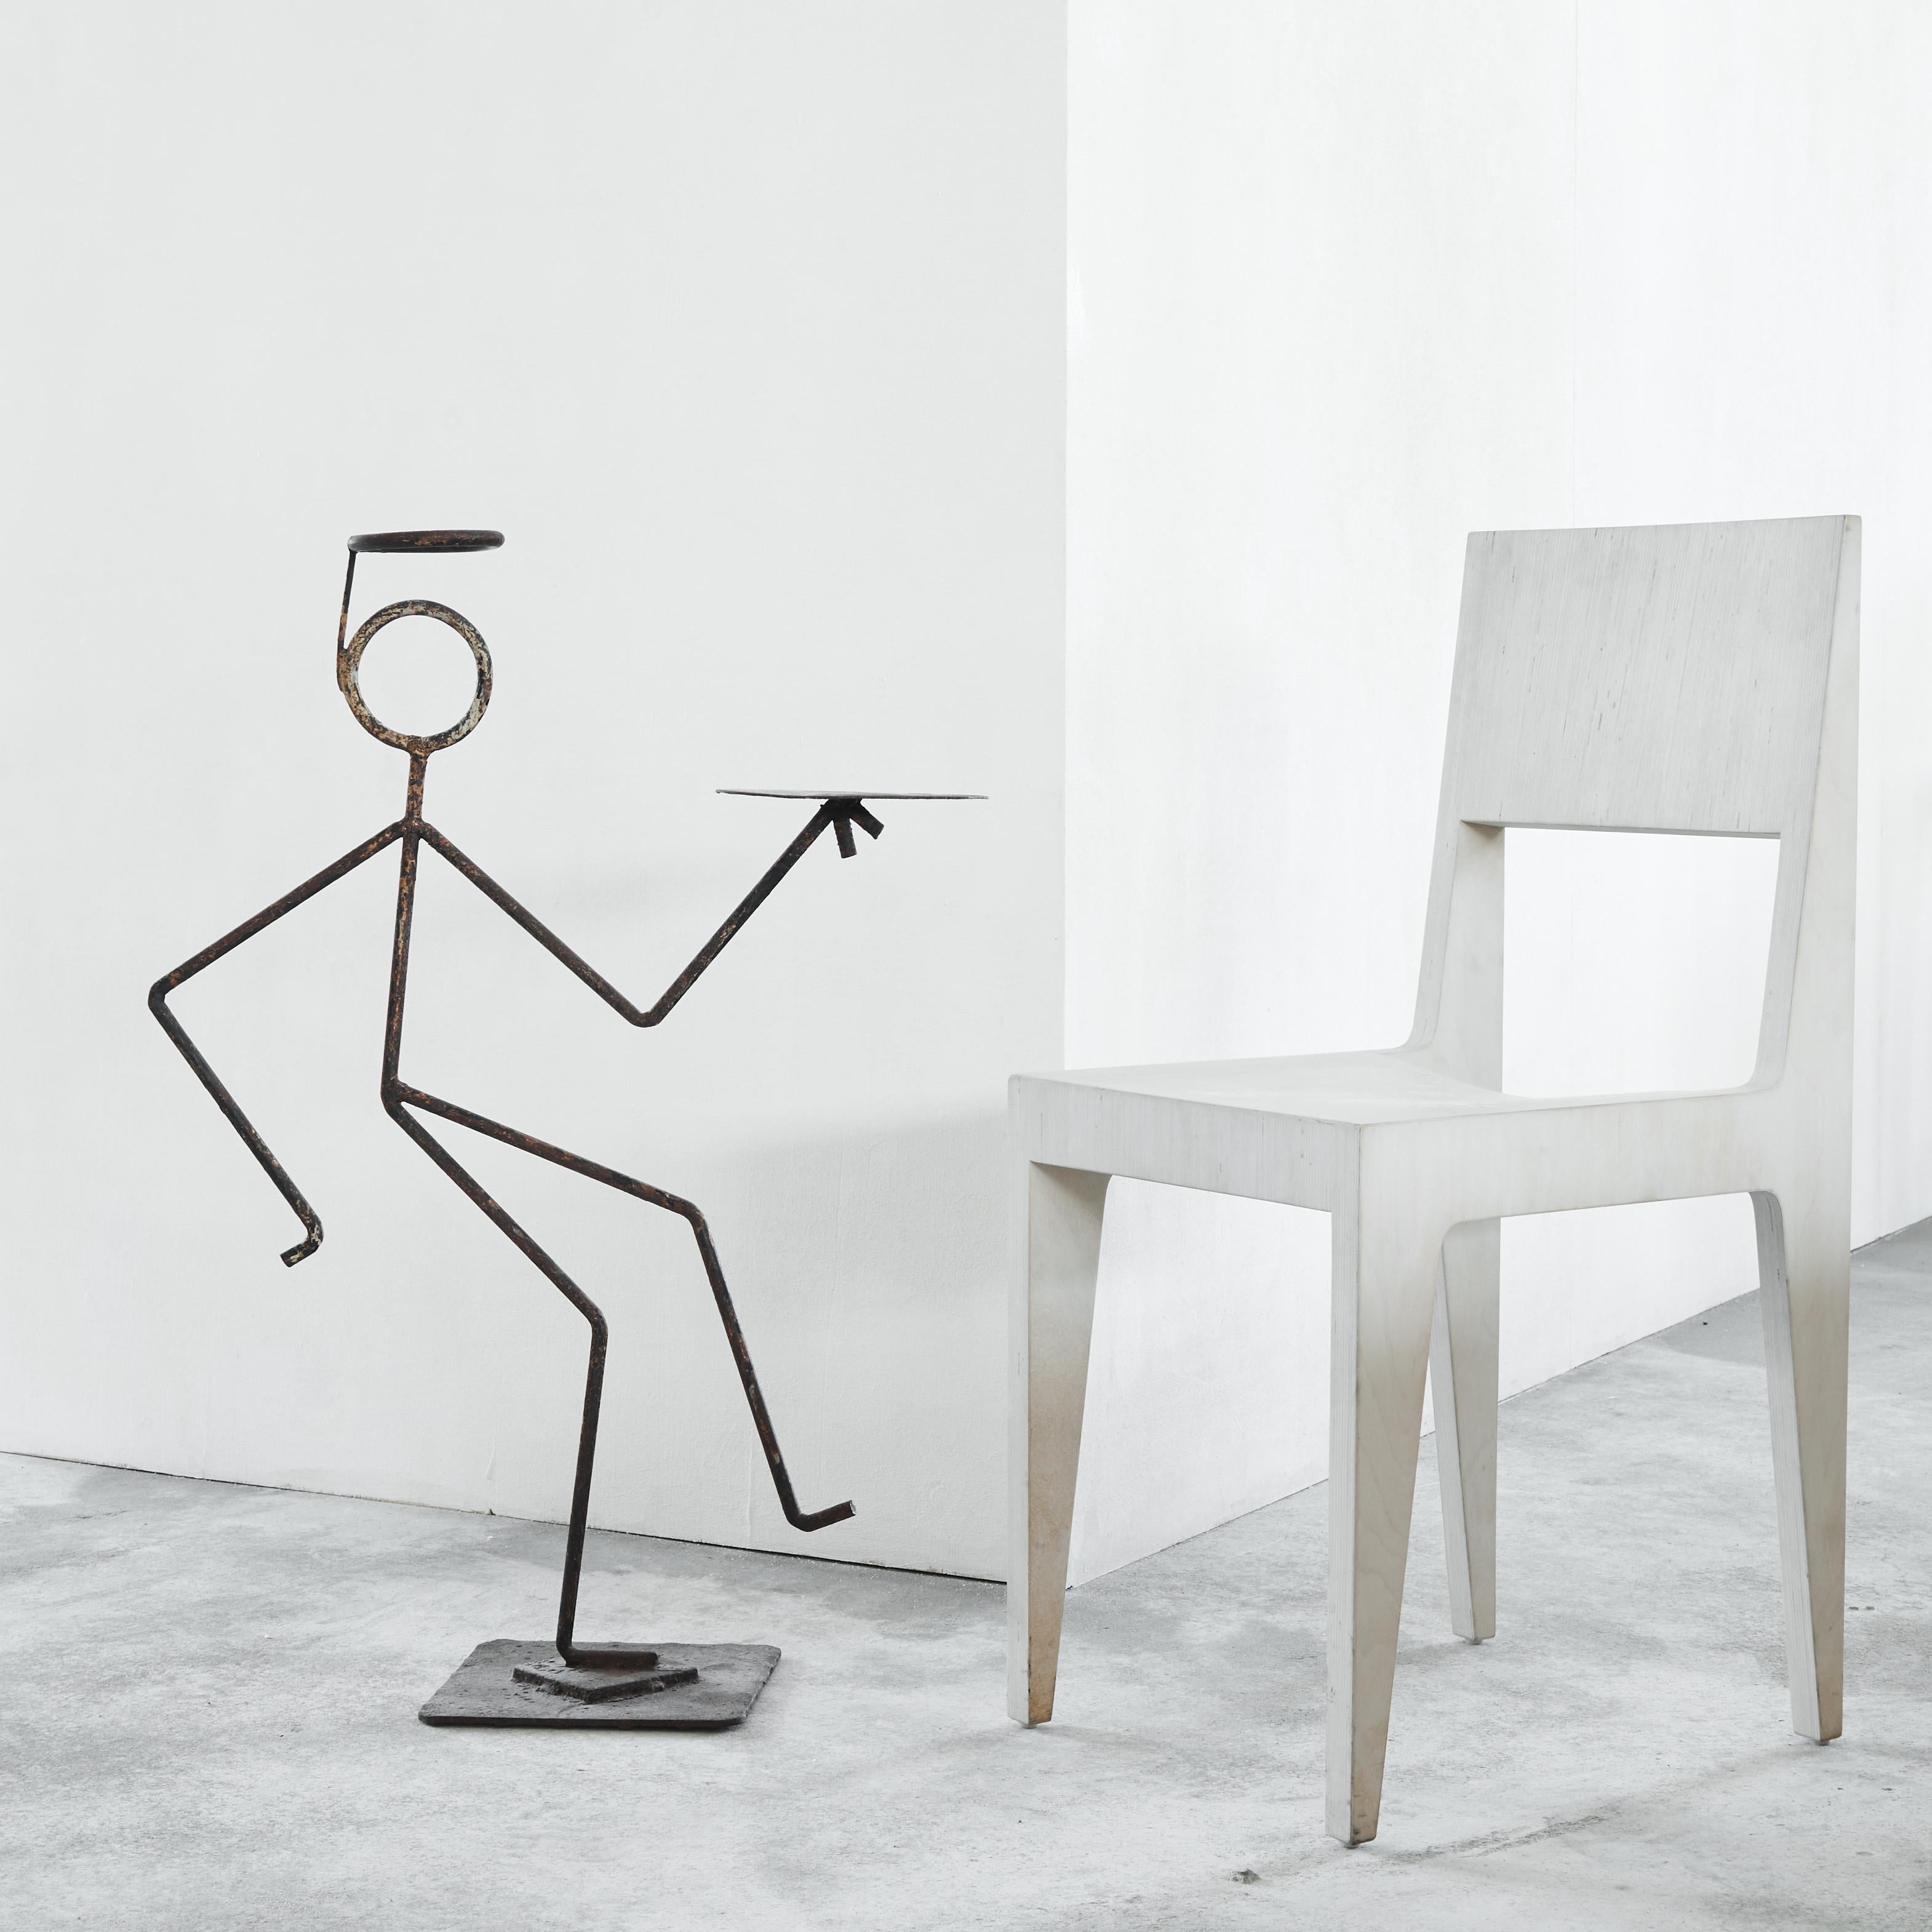 20th Century Unique 'The Saint' Stickman Occasional Table From the Film Set 1960s For Sale